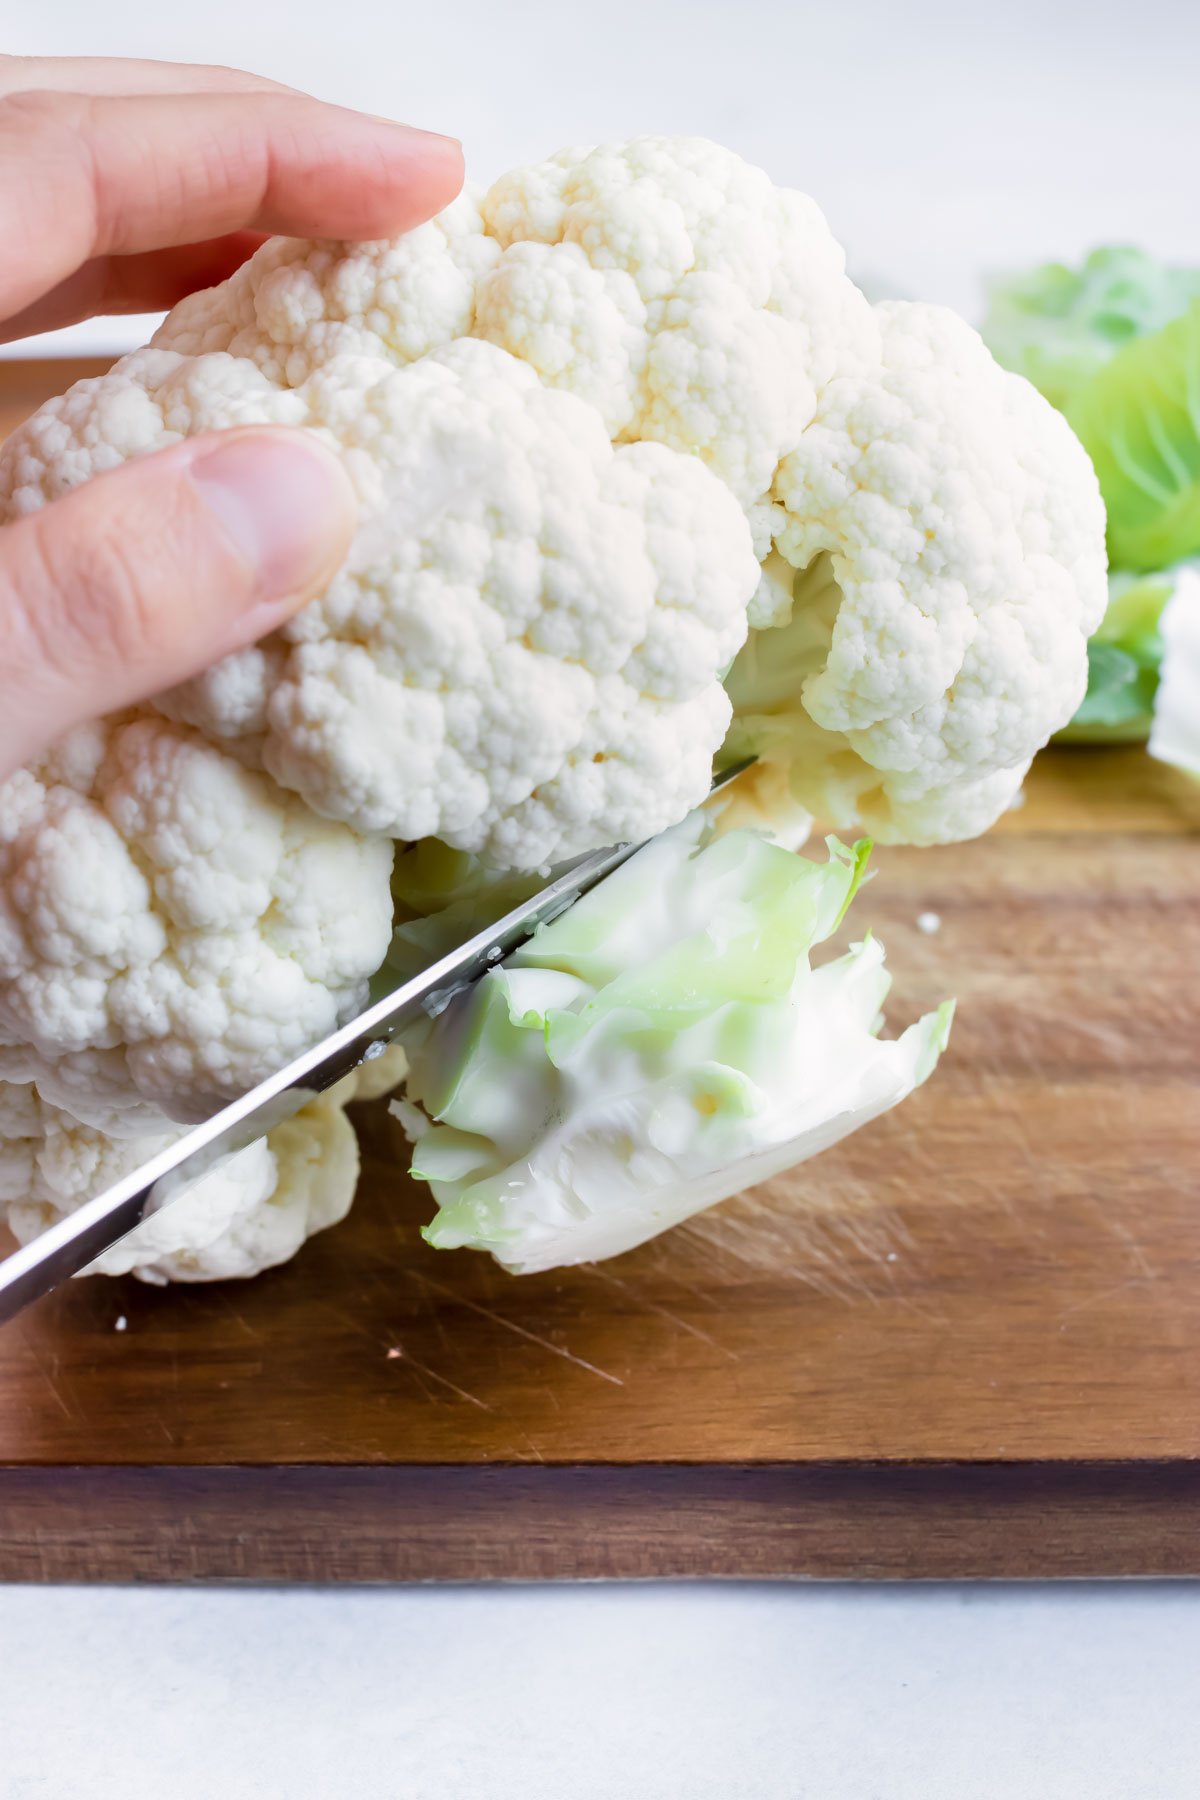 Cut off the stem before making this whole baked cauliflower.